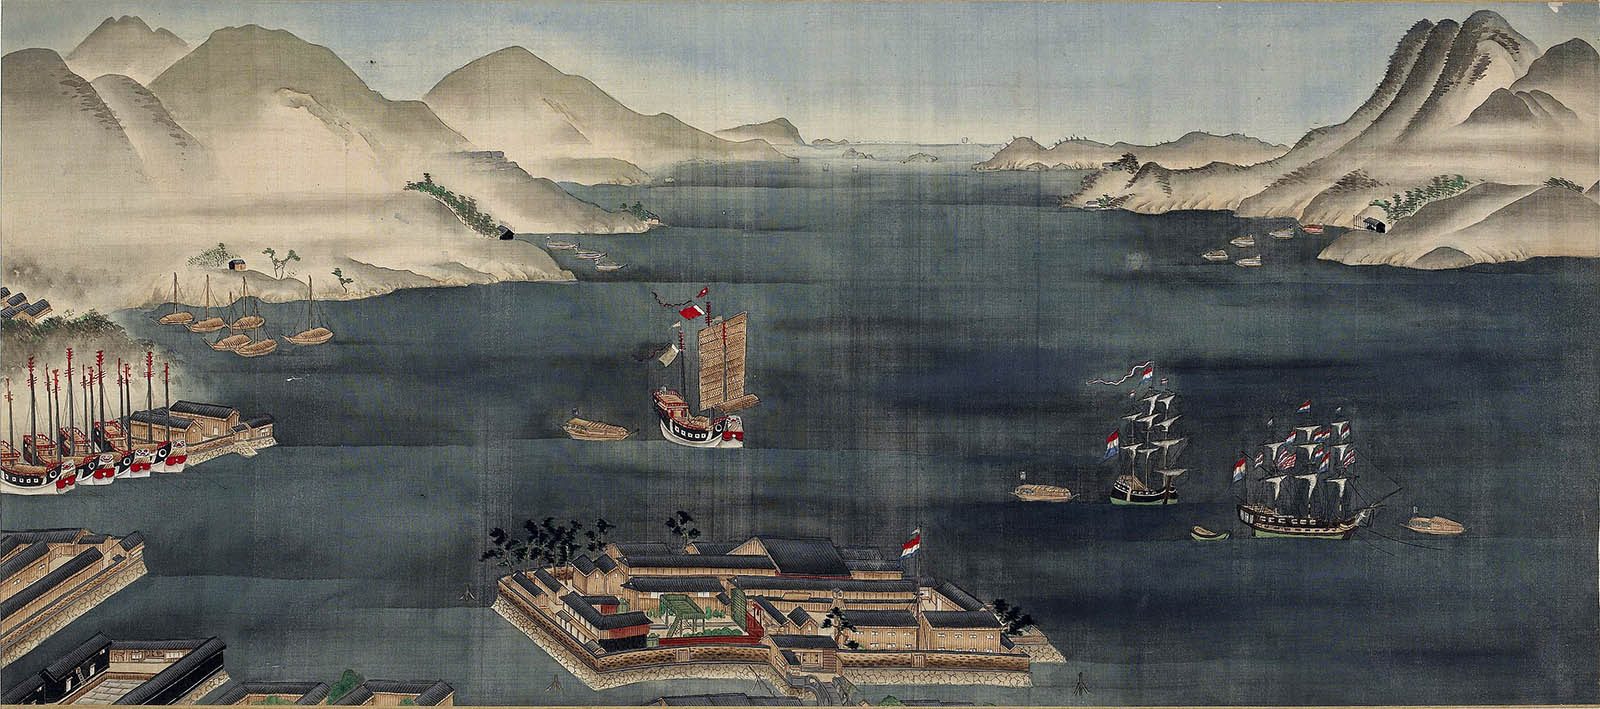 View of the enclave of the island of Deshima, in the port of Nagasaki, the only place where Dutch navigators could disembark to trade - Kawahara Keiga (川 原 慶賀) (1800-1820) - Public domain, British Museum. 